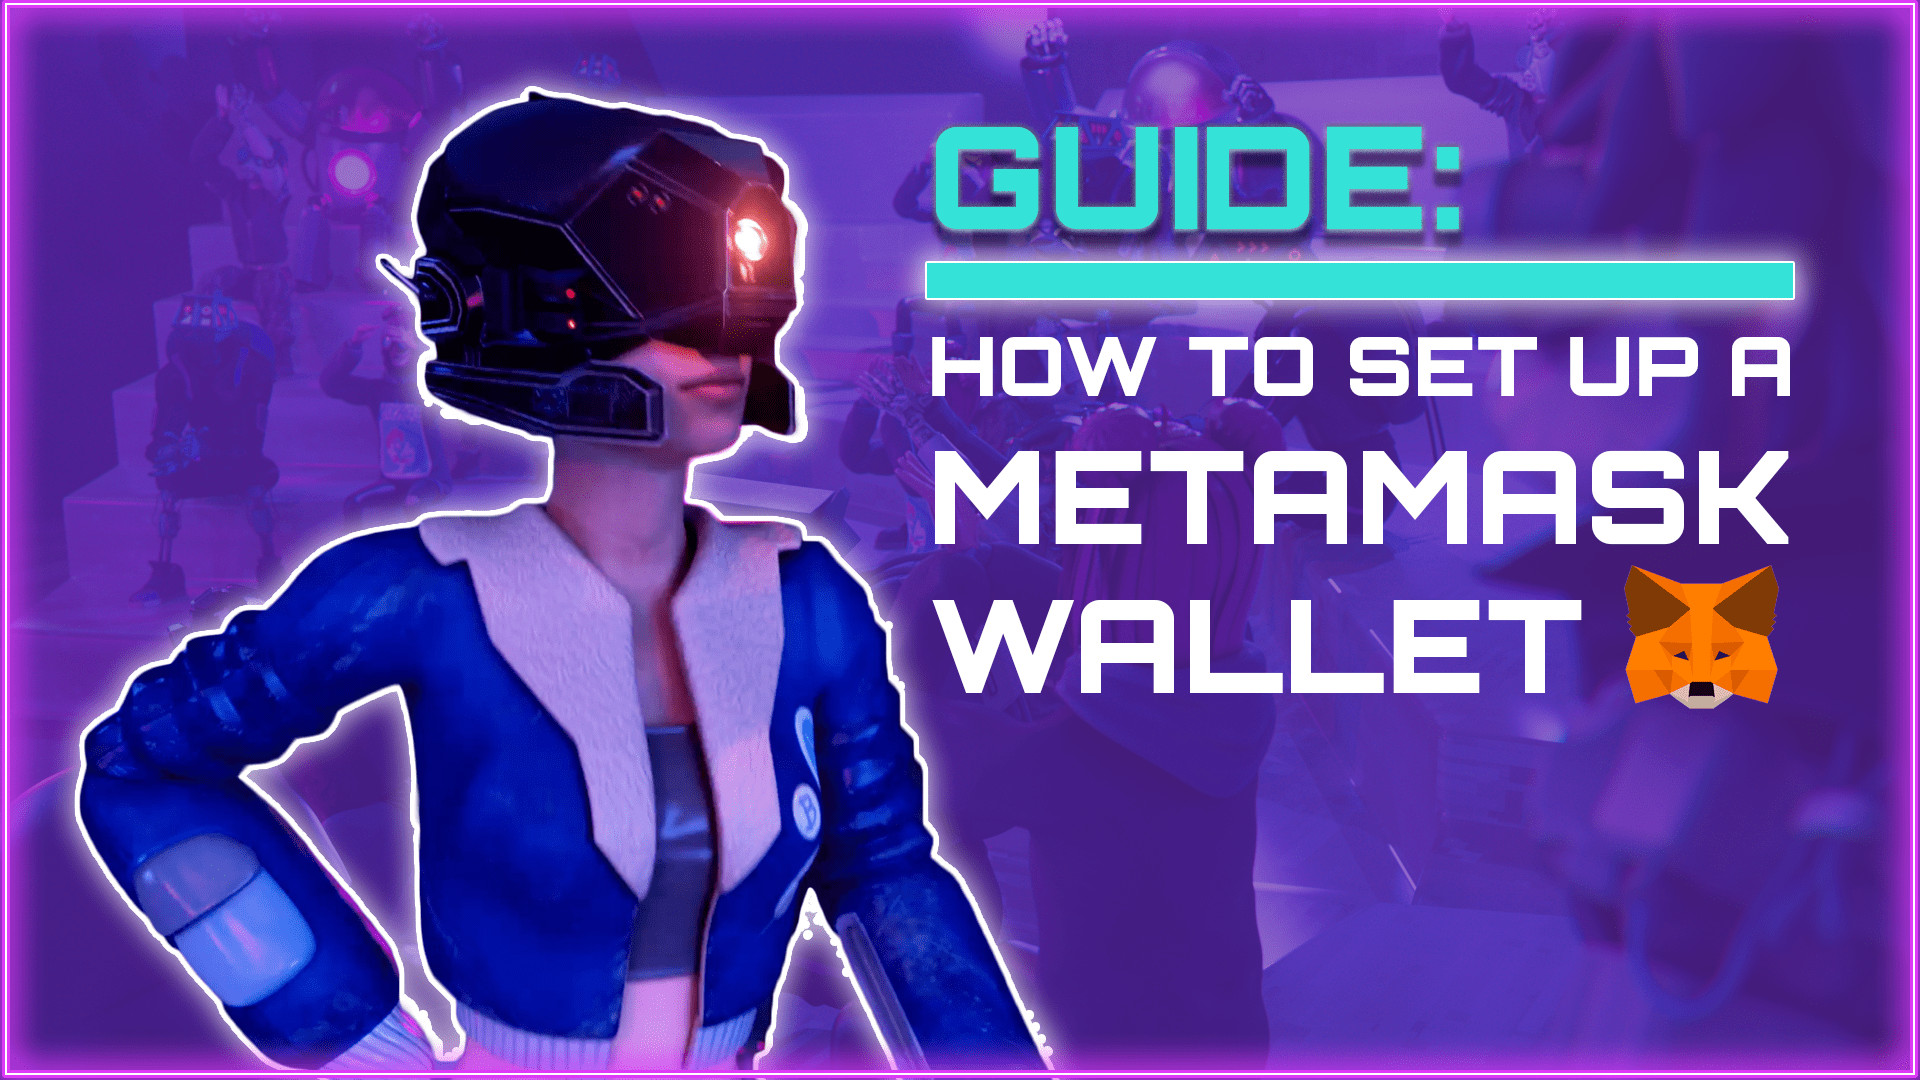 Guide: How to set up Metamask Wallet on Learnoverse? cover image